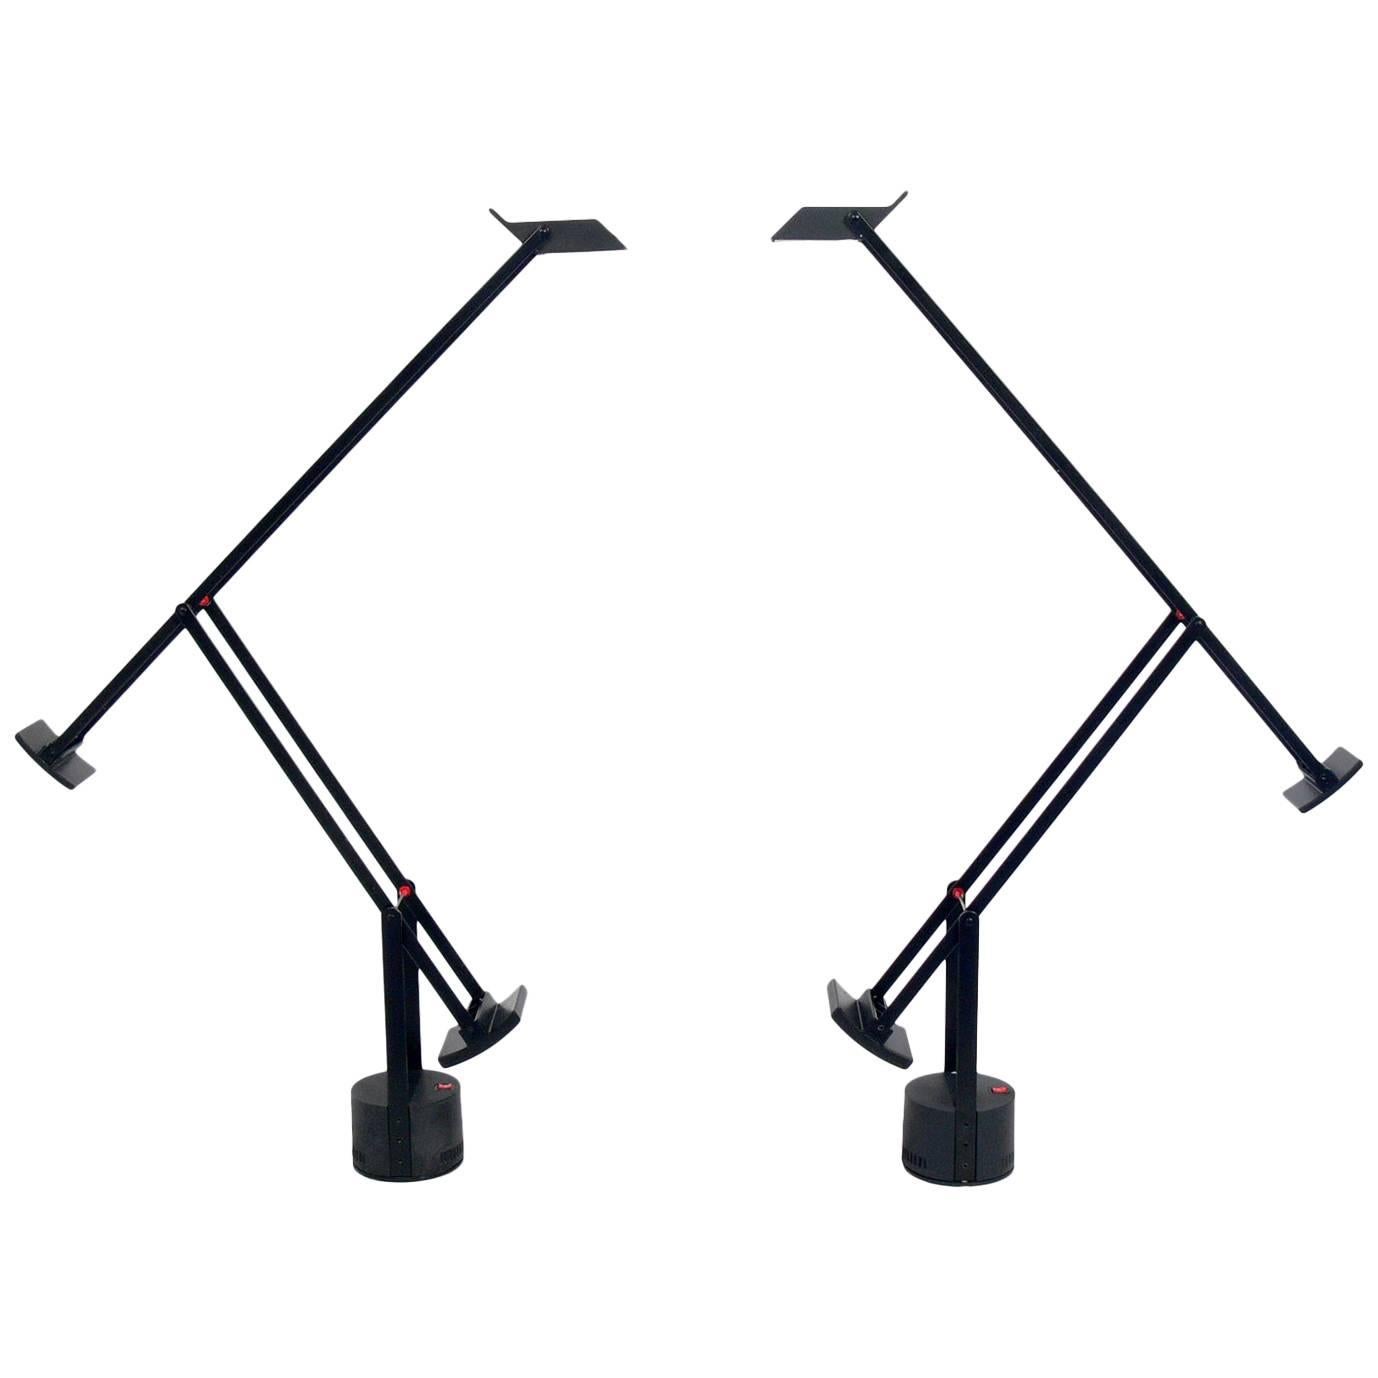 Pair of Articulated Tizio Lamps by Richard Sapper for Artemide